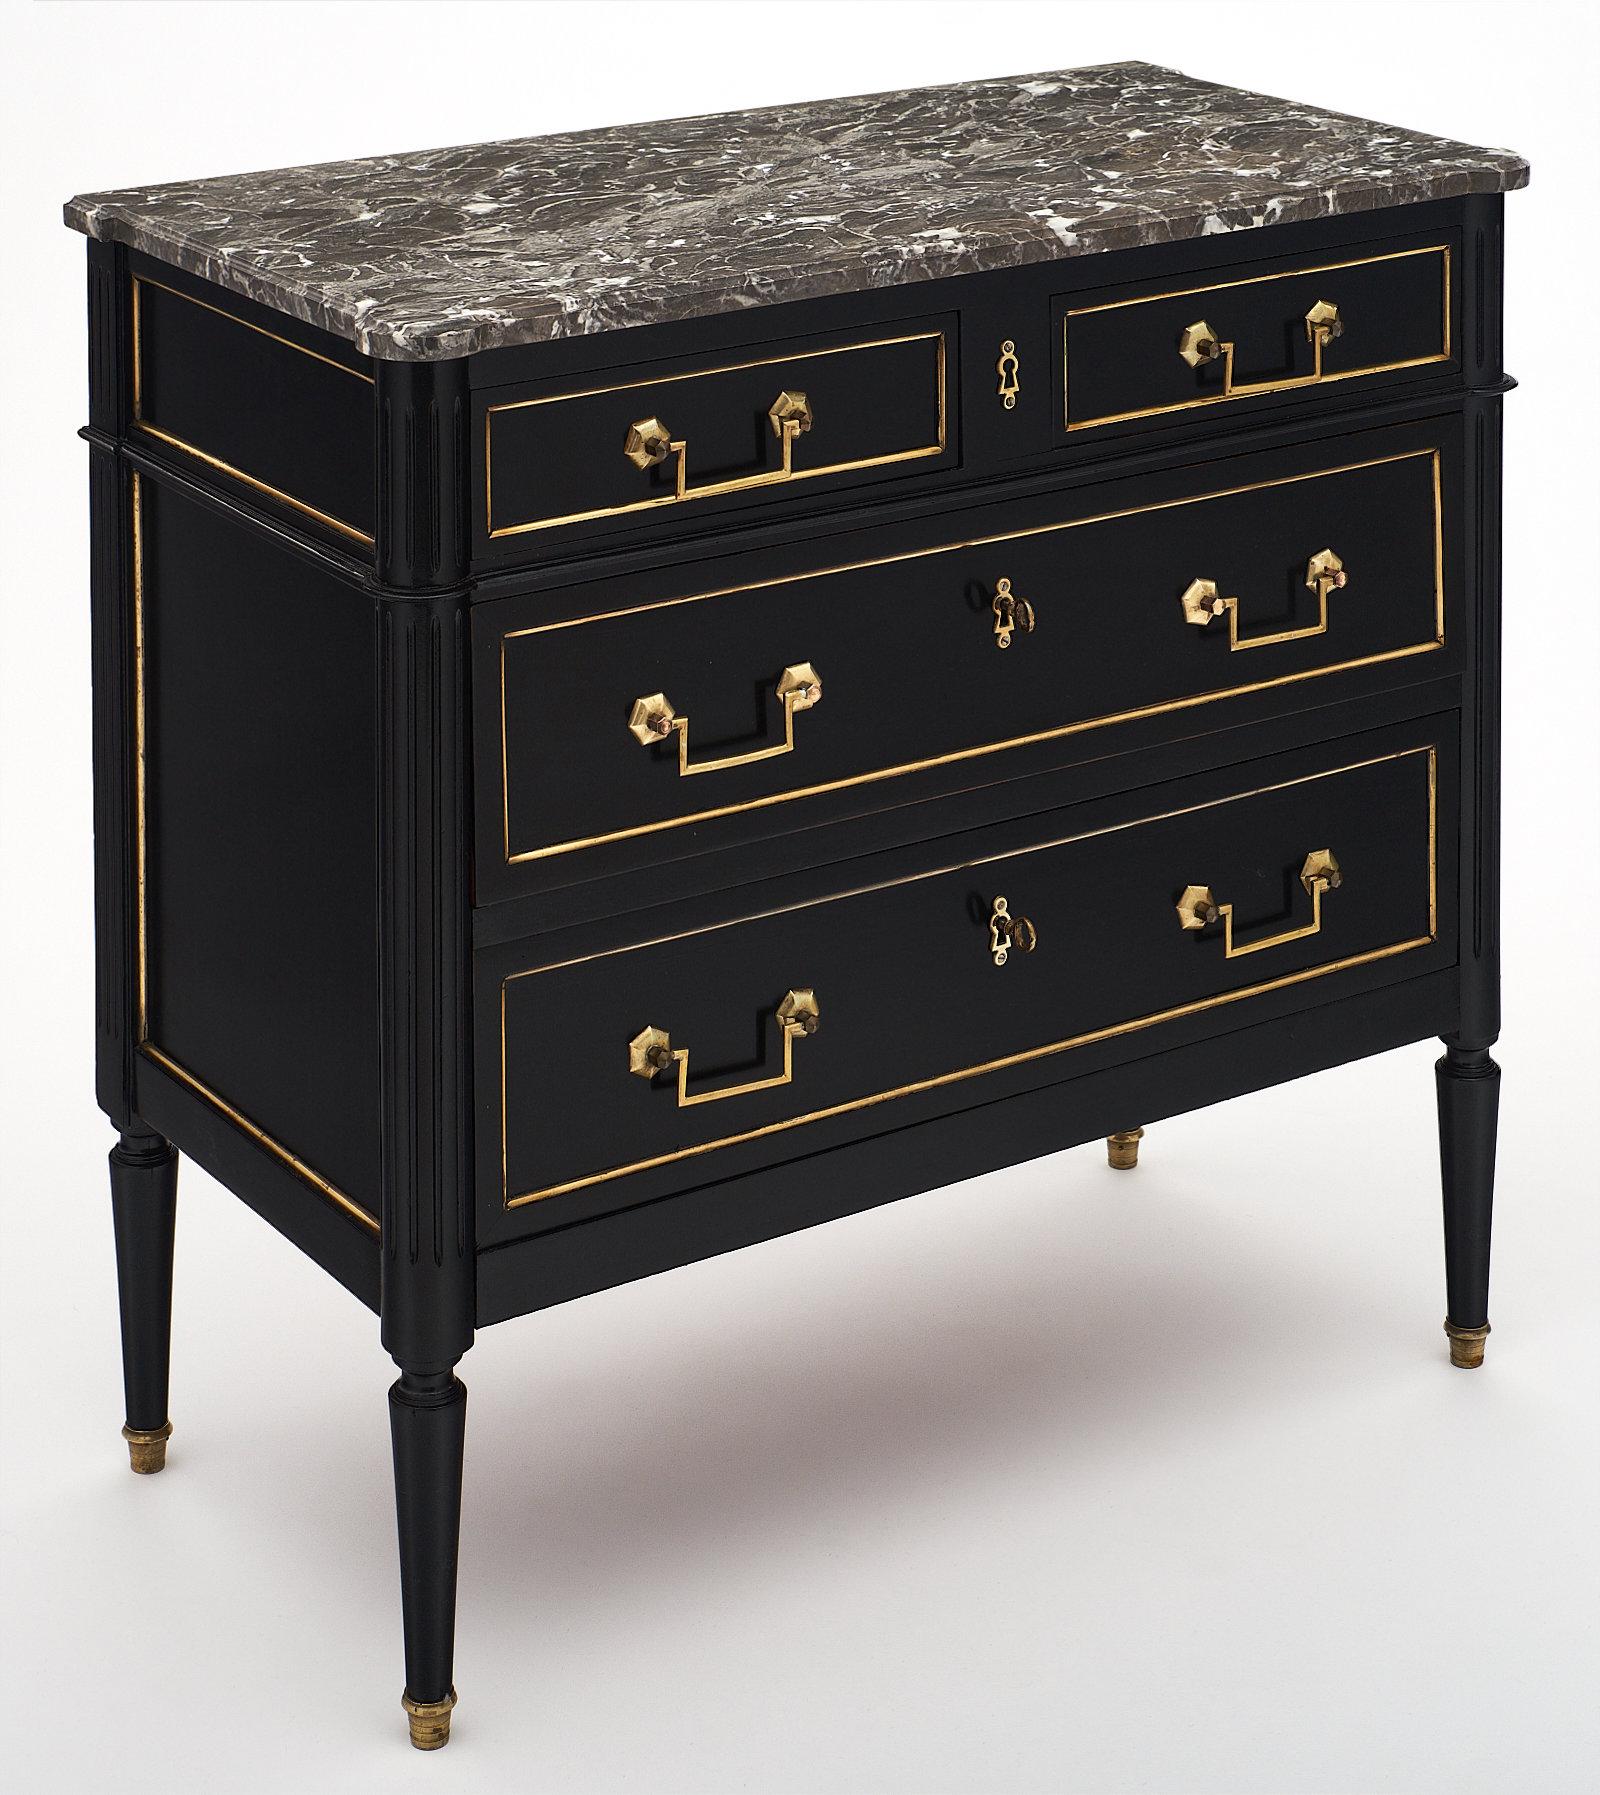 A Louis XVI style antique chest of drawers with grey marble. This piece is made of mahogany and finished with a lustrous ebonized French polish. The piece features the original gilt brass hardware with gilt trims throughout. We loved the grey veined